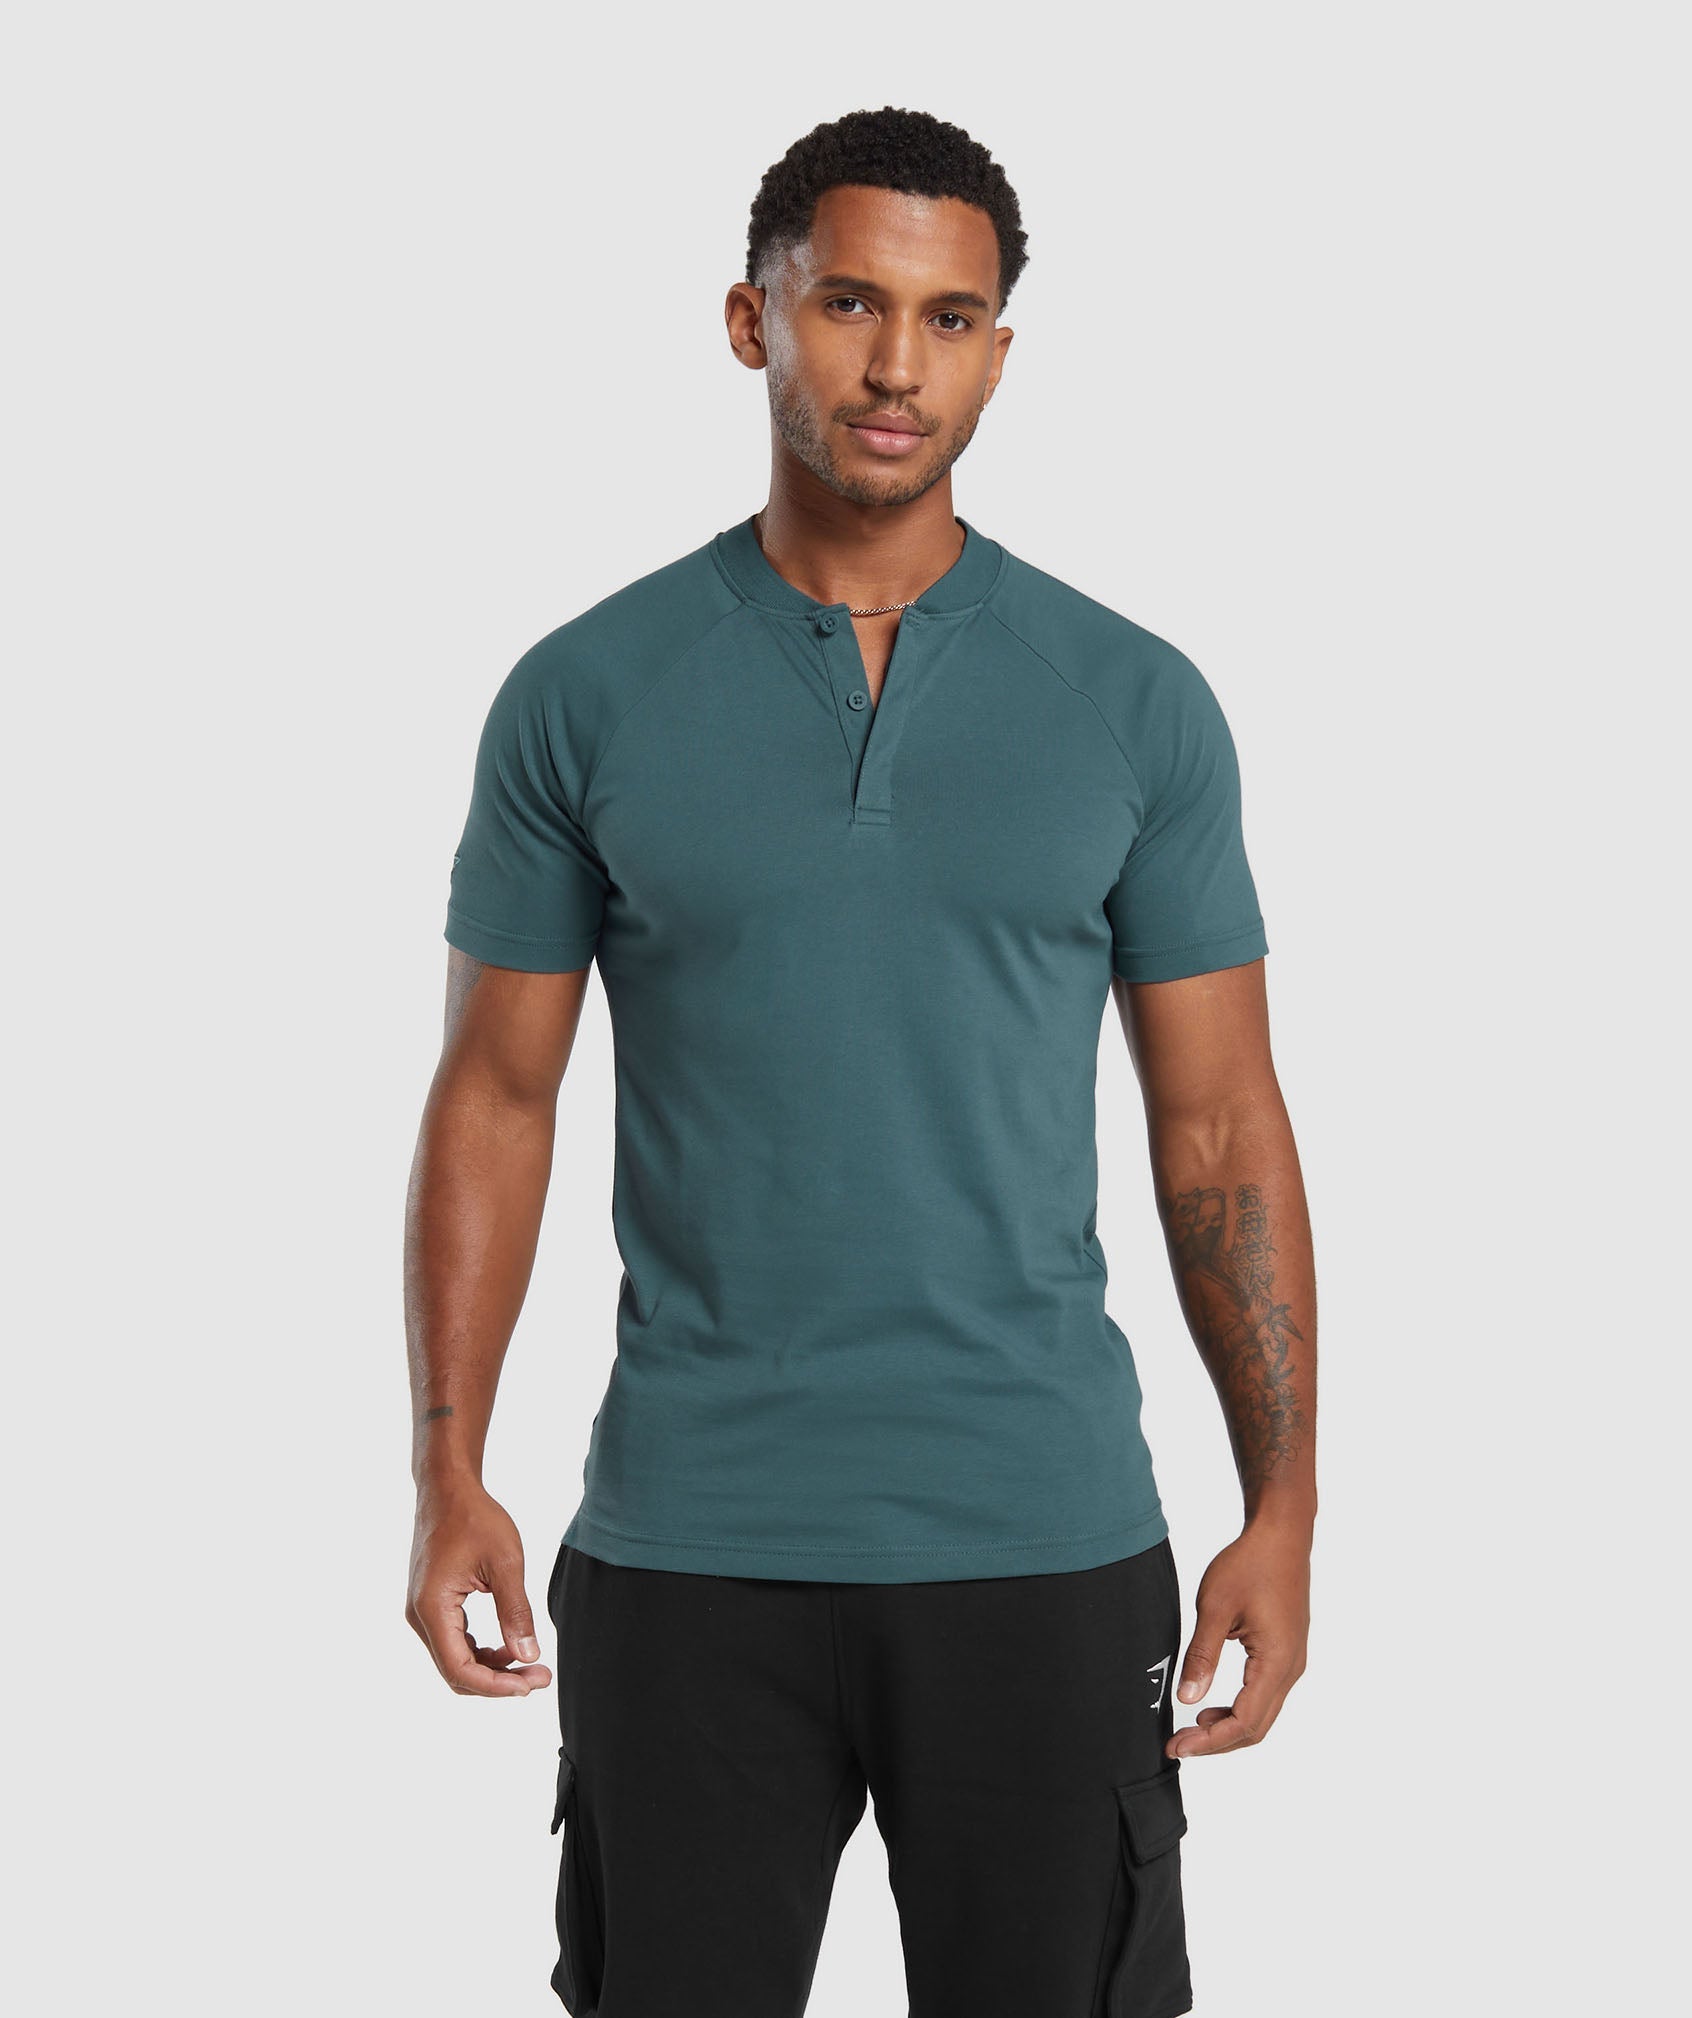 Rest Day Commute Polo Shirt in {{variantColor} is out of stock